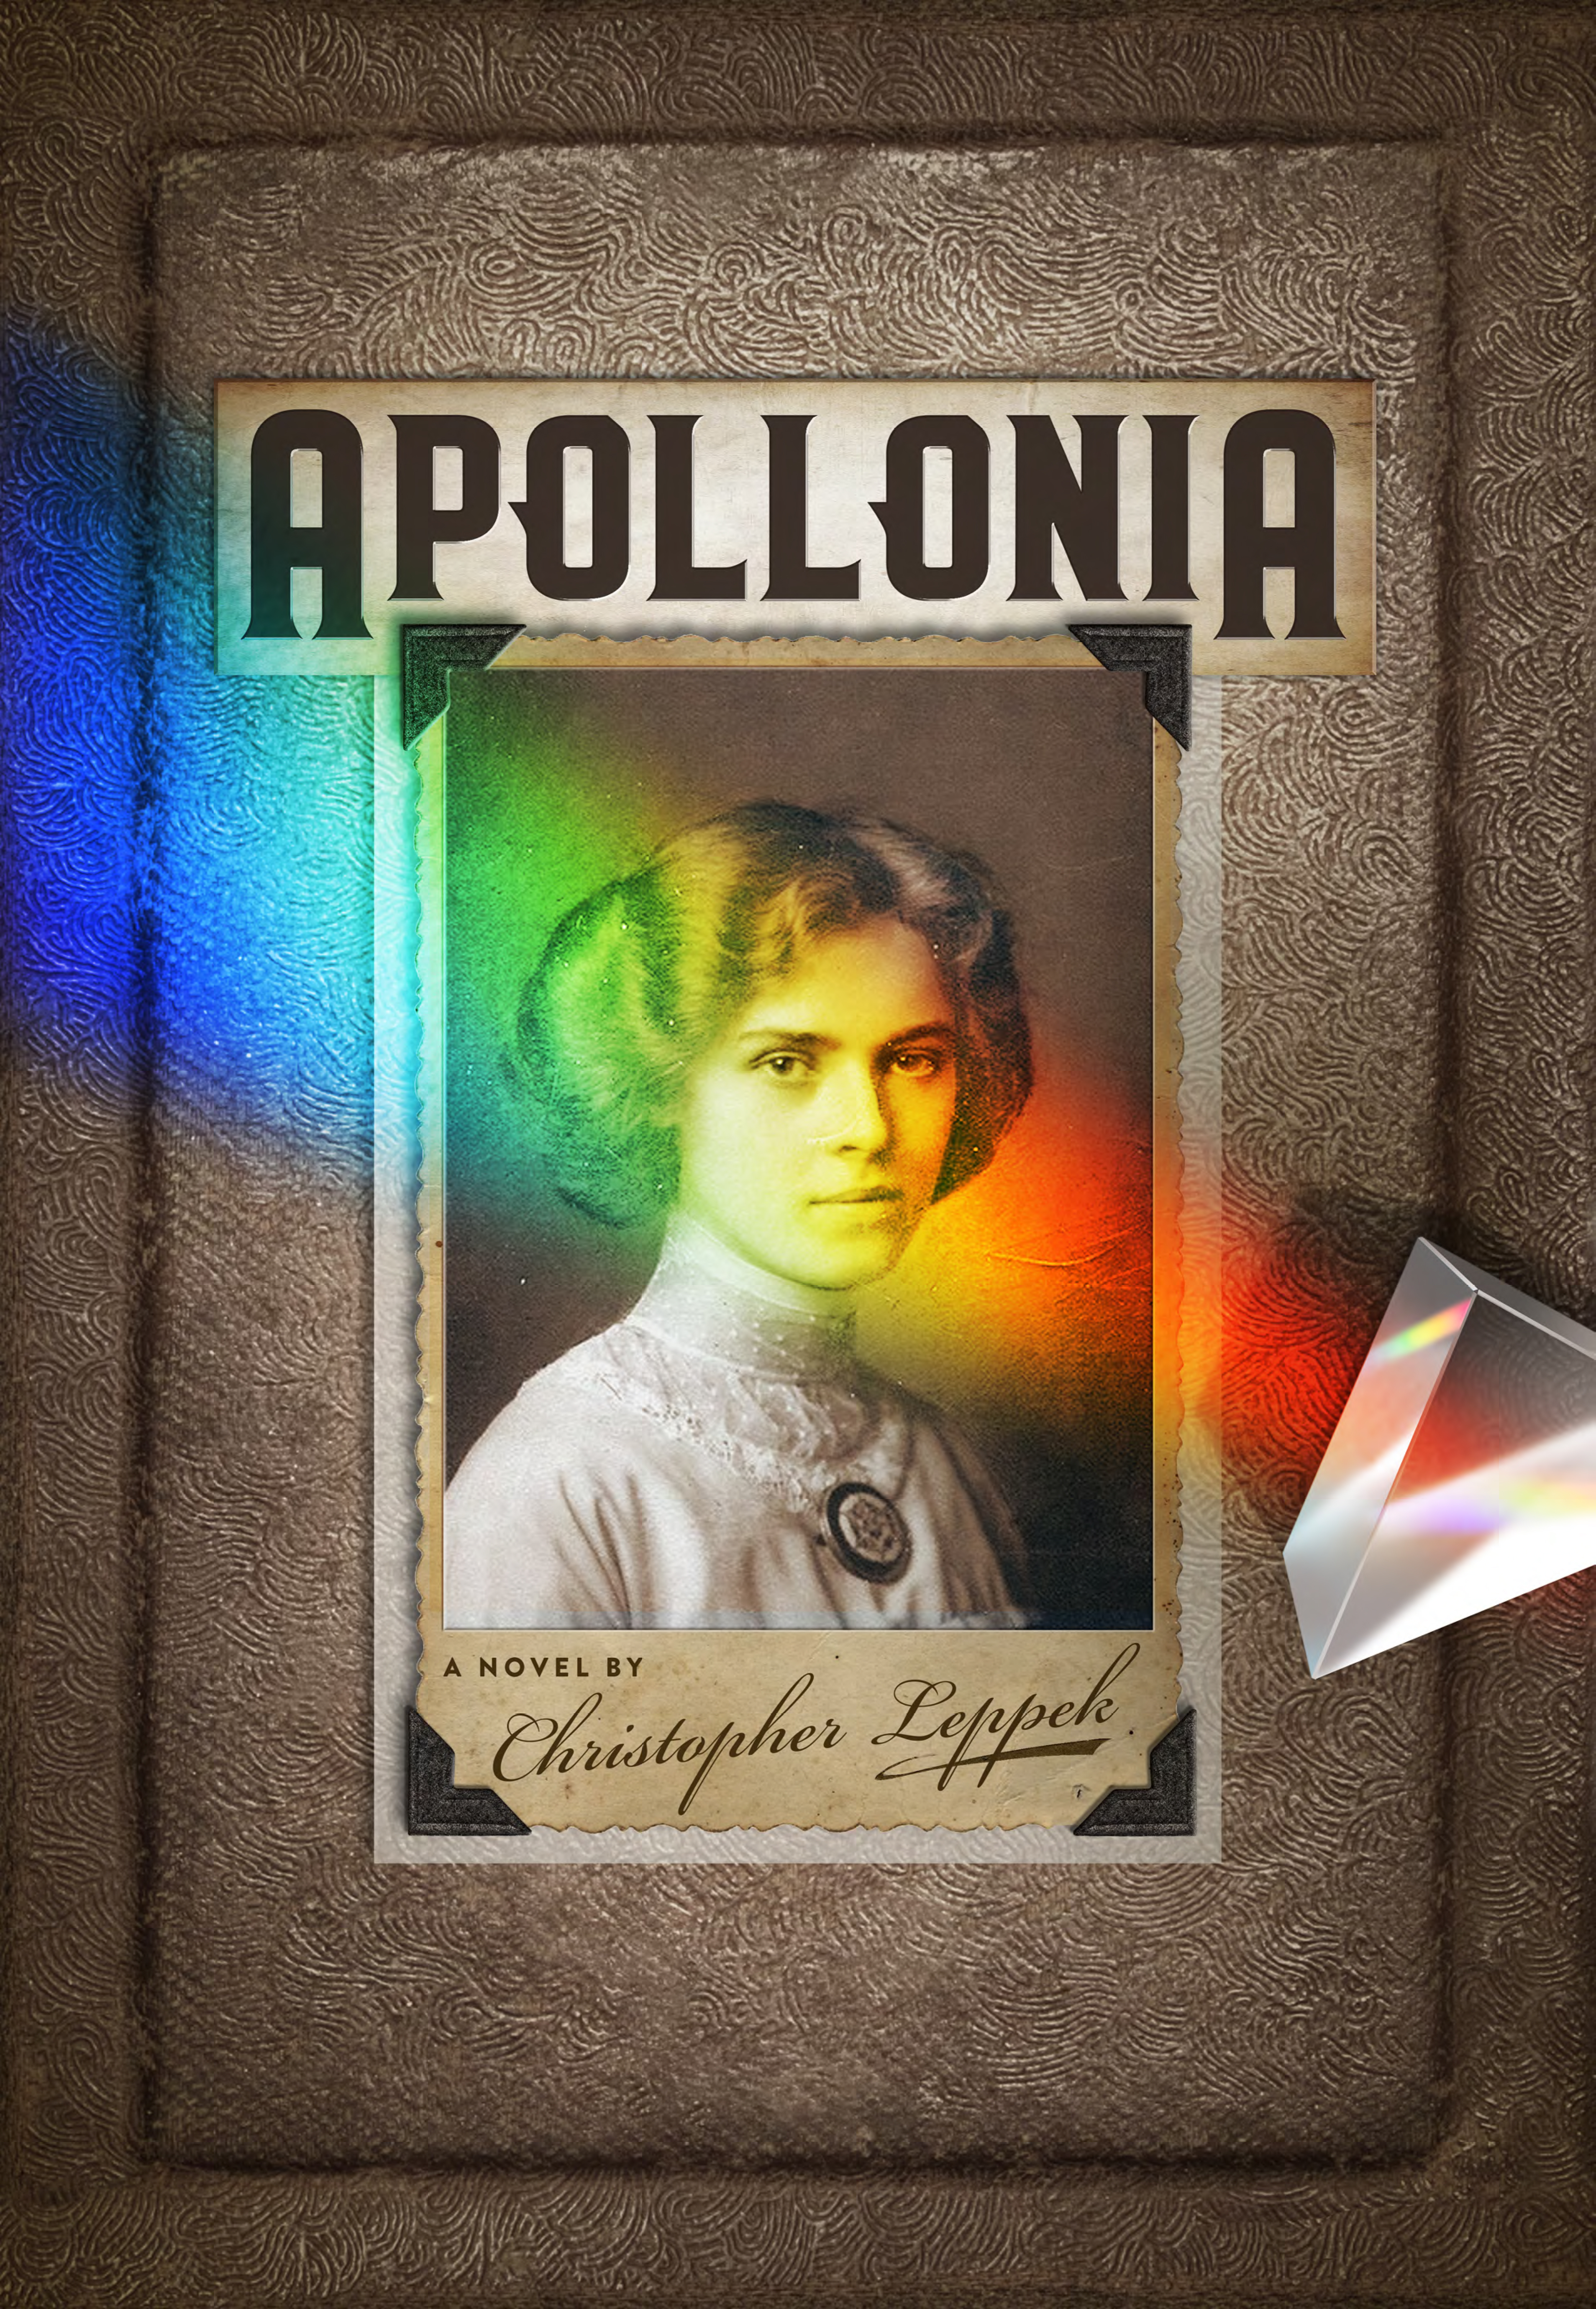 Apollonia by Christopher Leppek